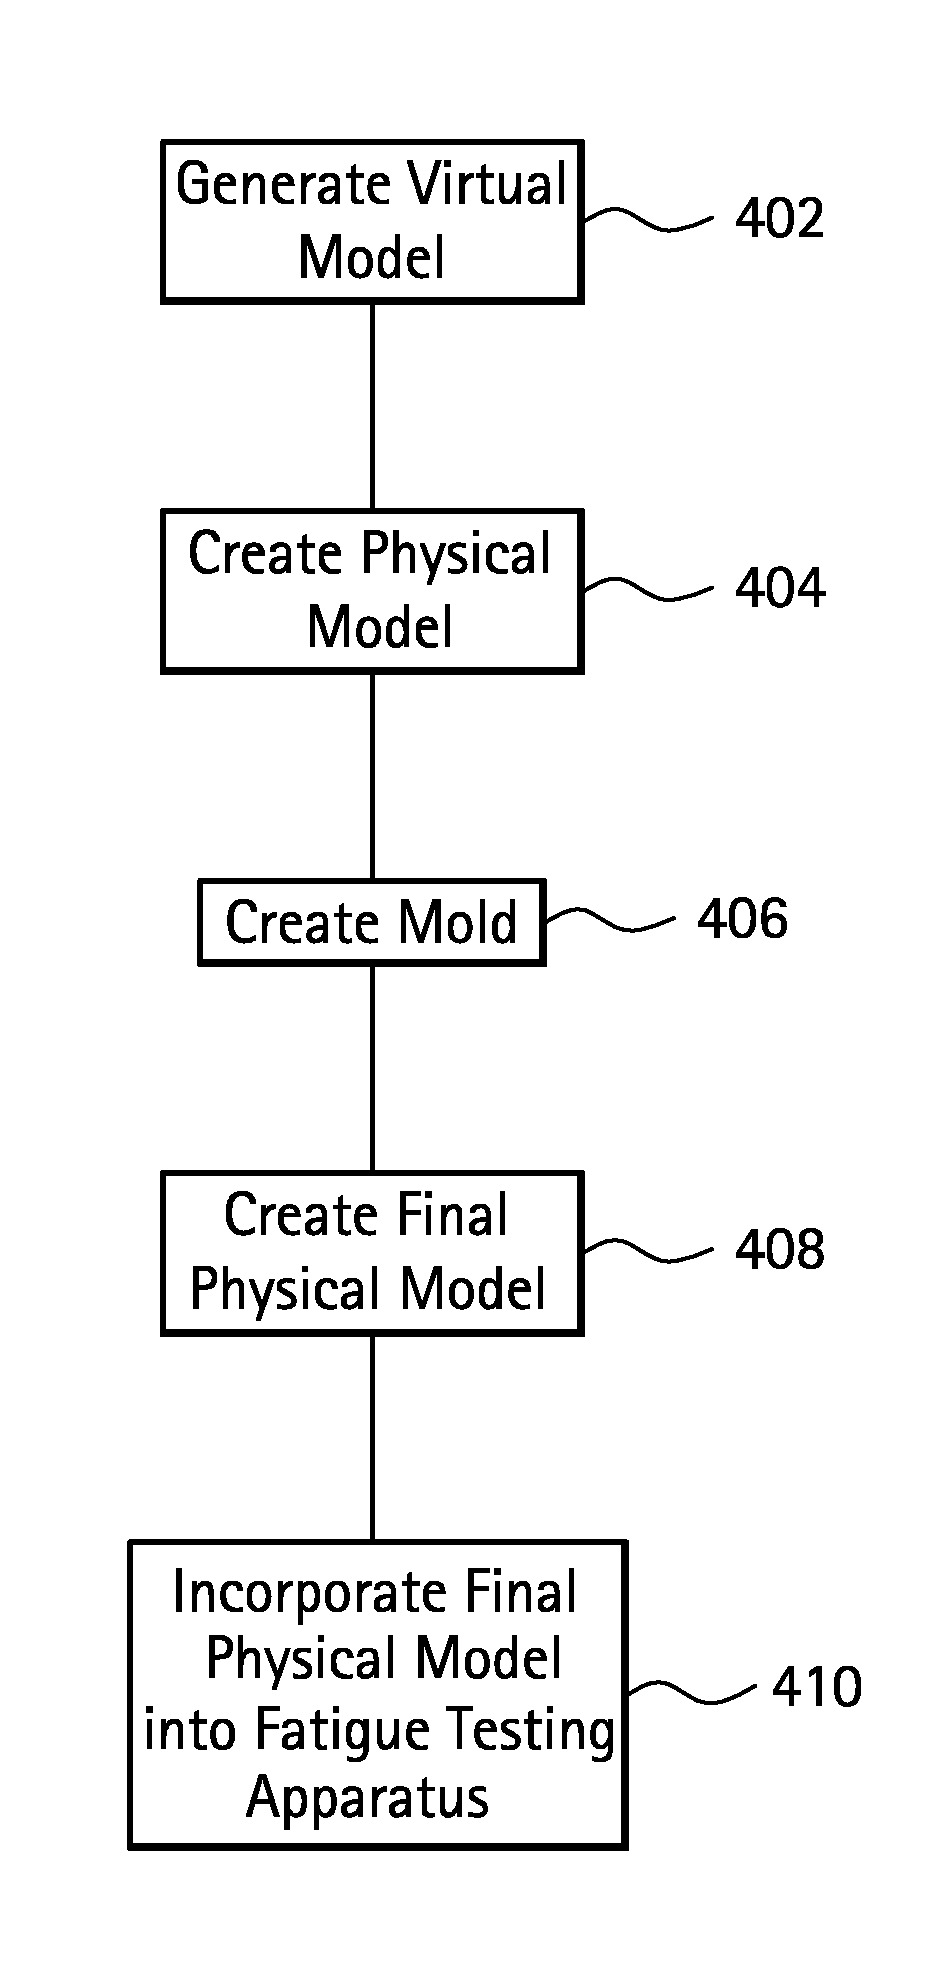 Anatomically compliant aaa model and the method of manufacture for in vitro simulated device testing